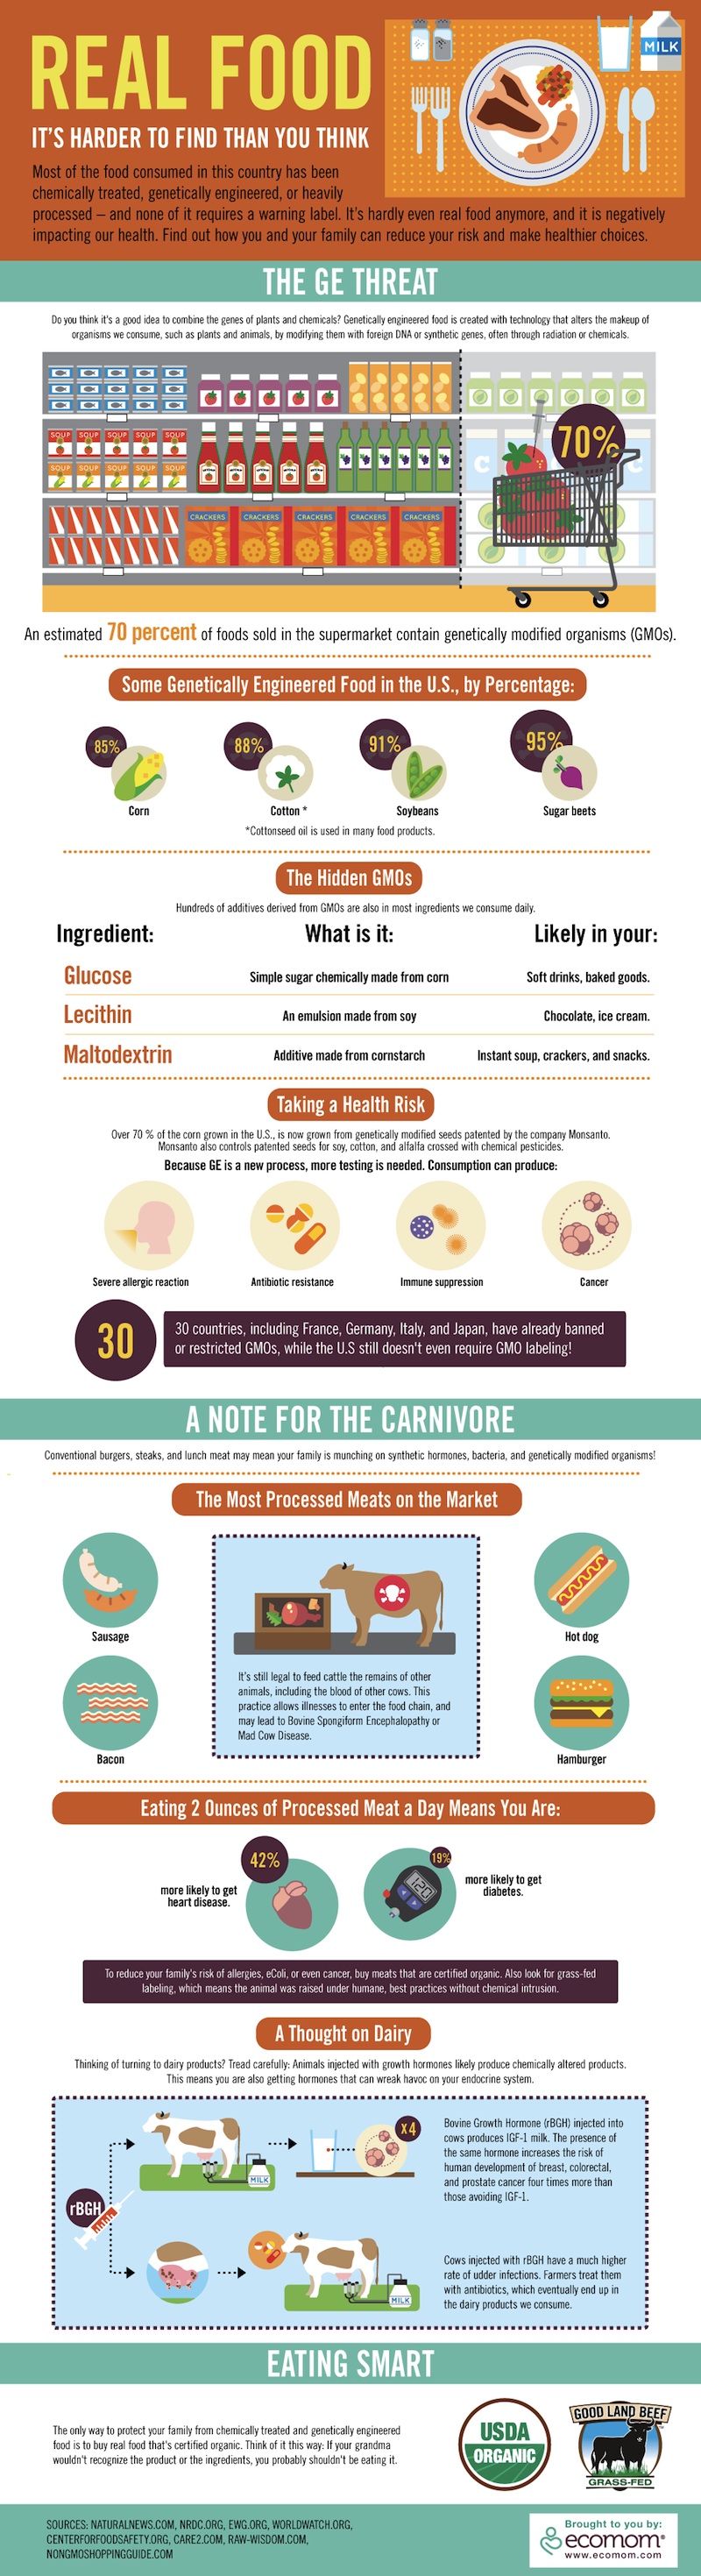 On The Hunt For Real Food: Why It’s So Hard To Find Infographic